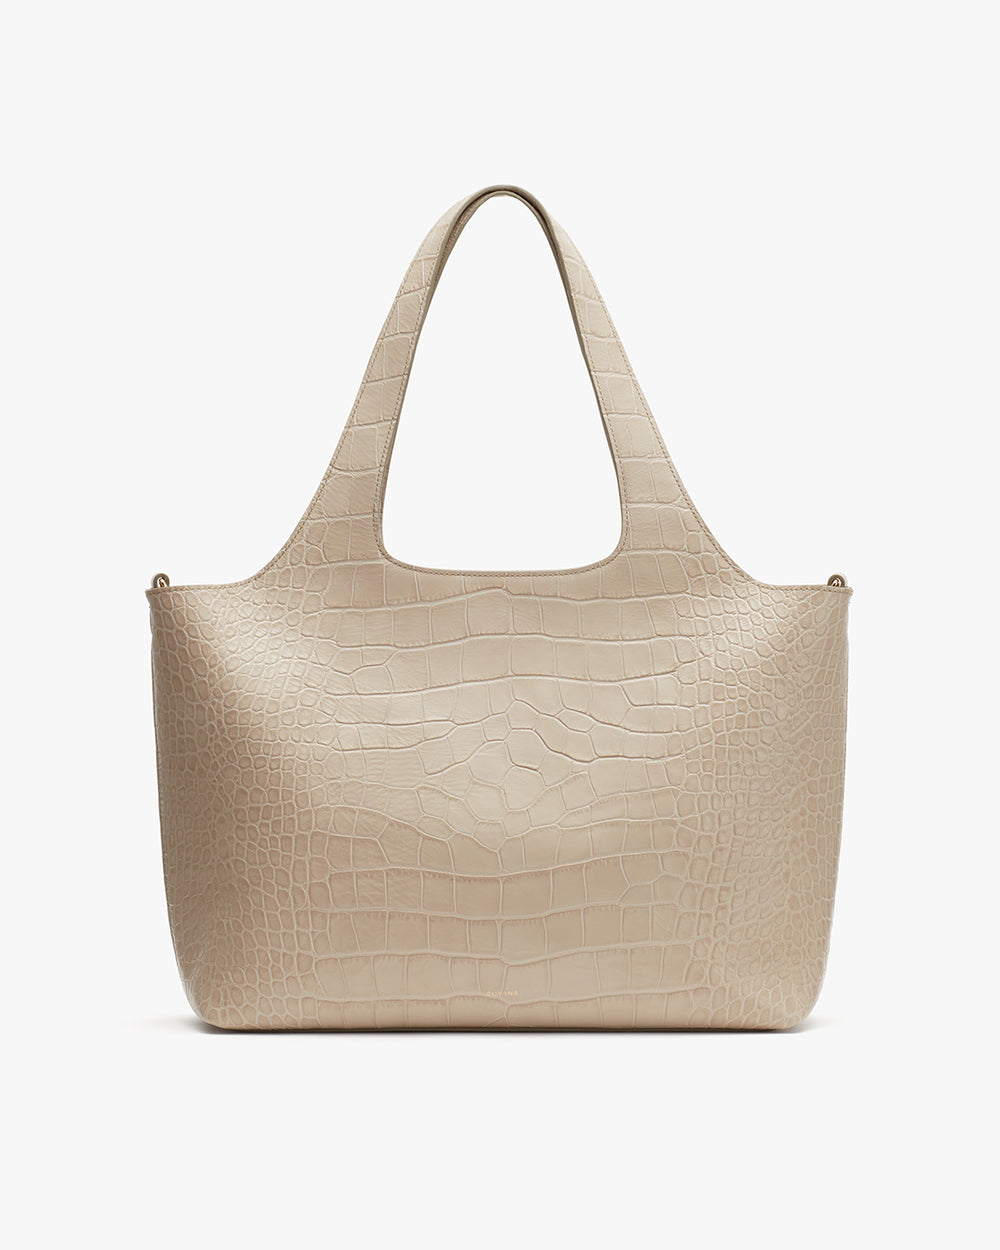 Handbag with two handles and textured surface.